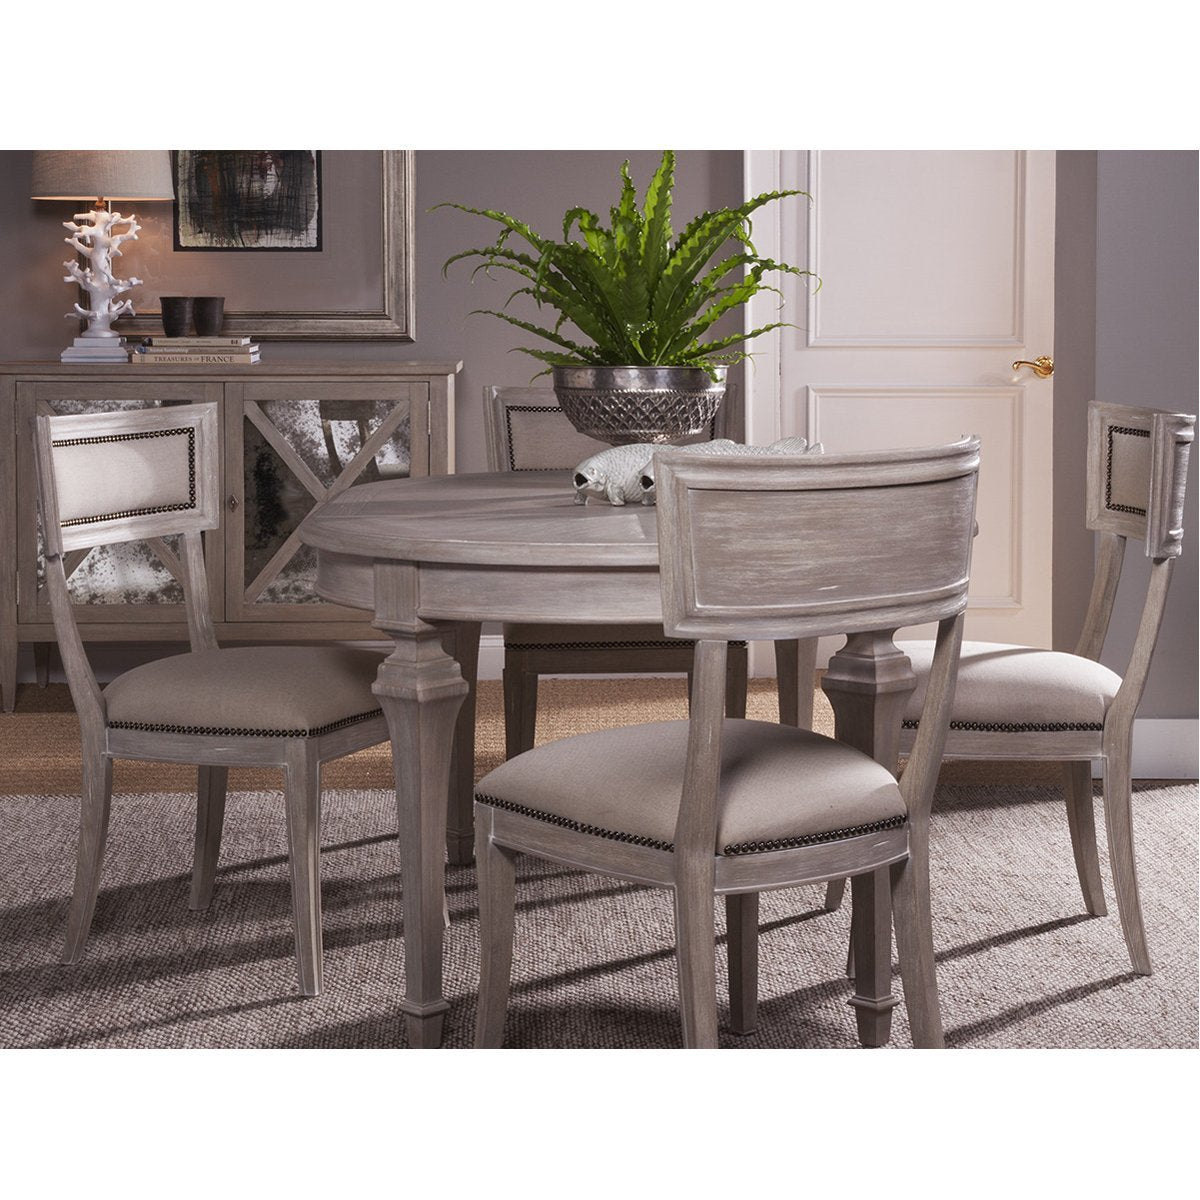 Artistica Home Apertif Round/Oval Dining Table 01-2000-870